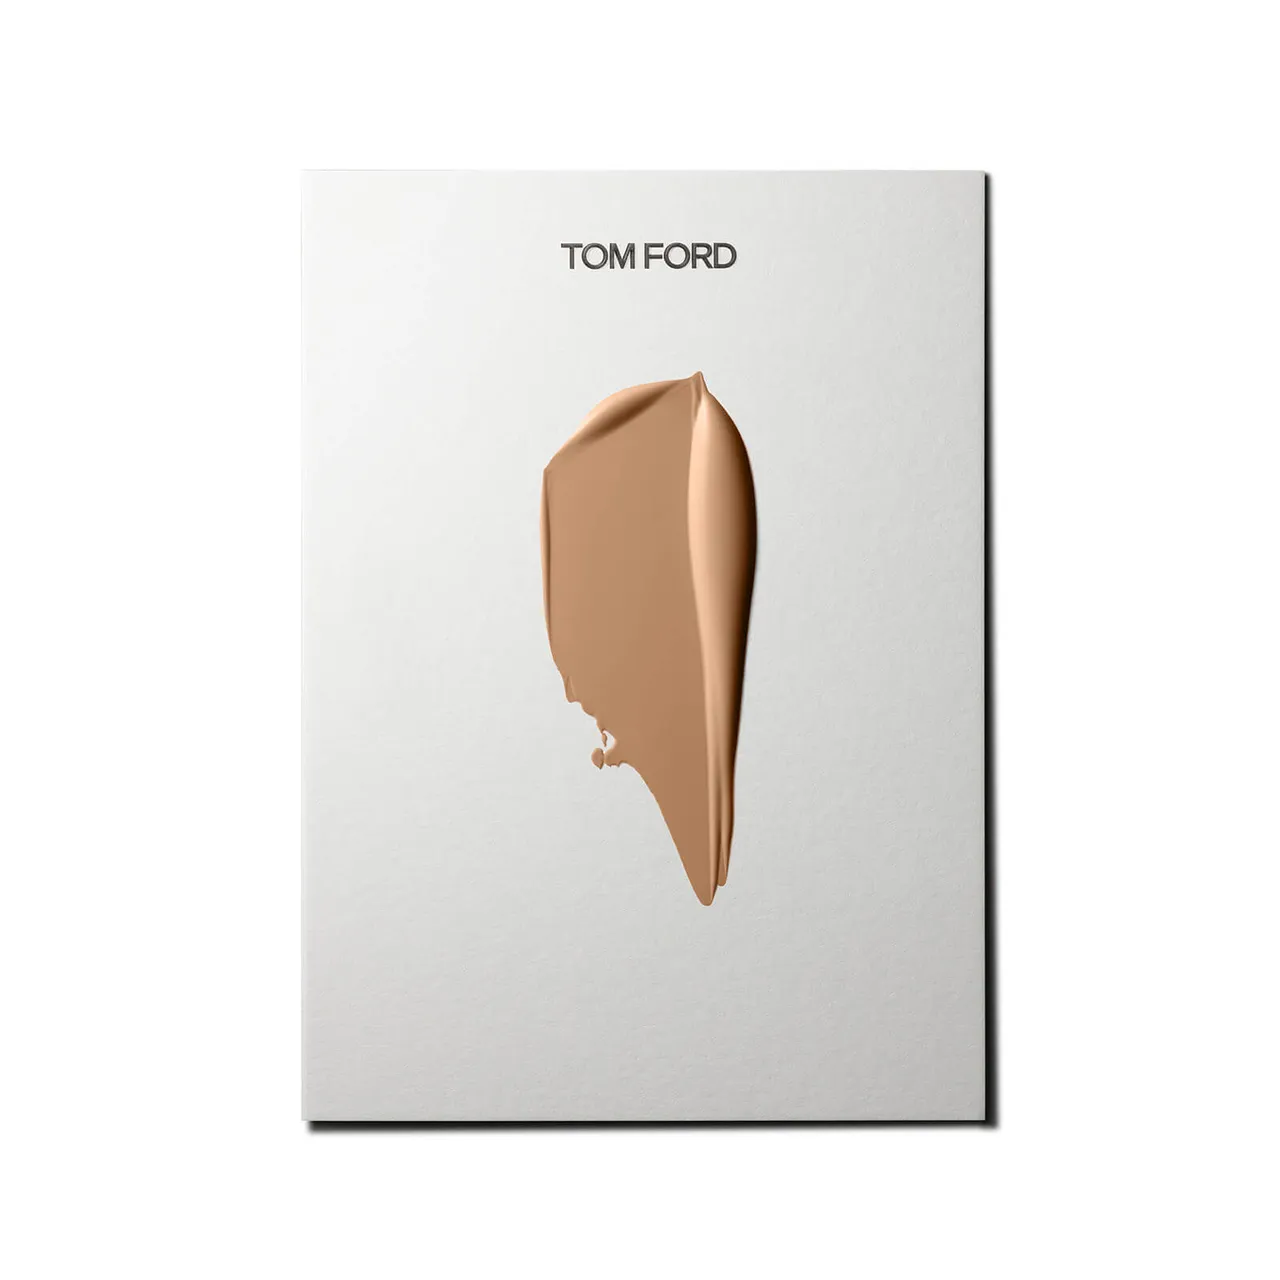 Tom Ford Traceless Soft Matte Foundation 30ml (Various Shades) - Shell Beige